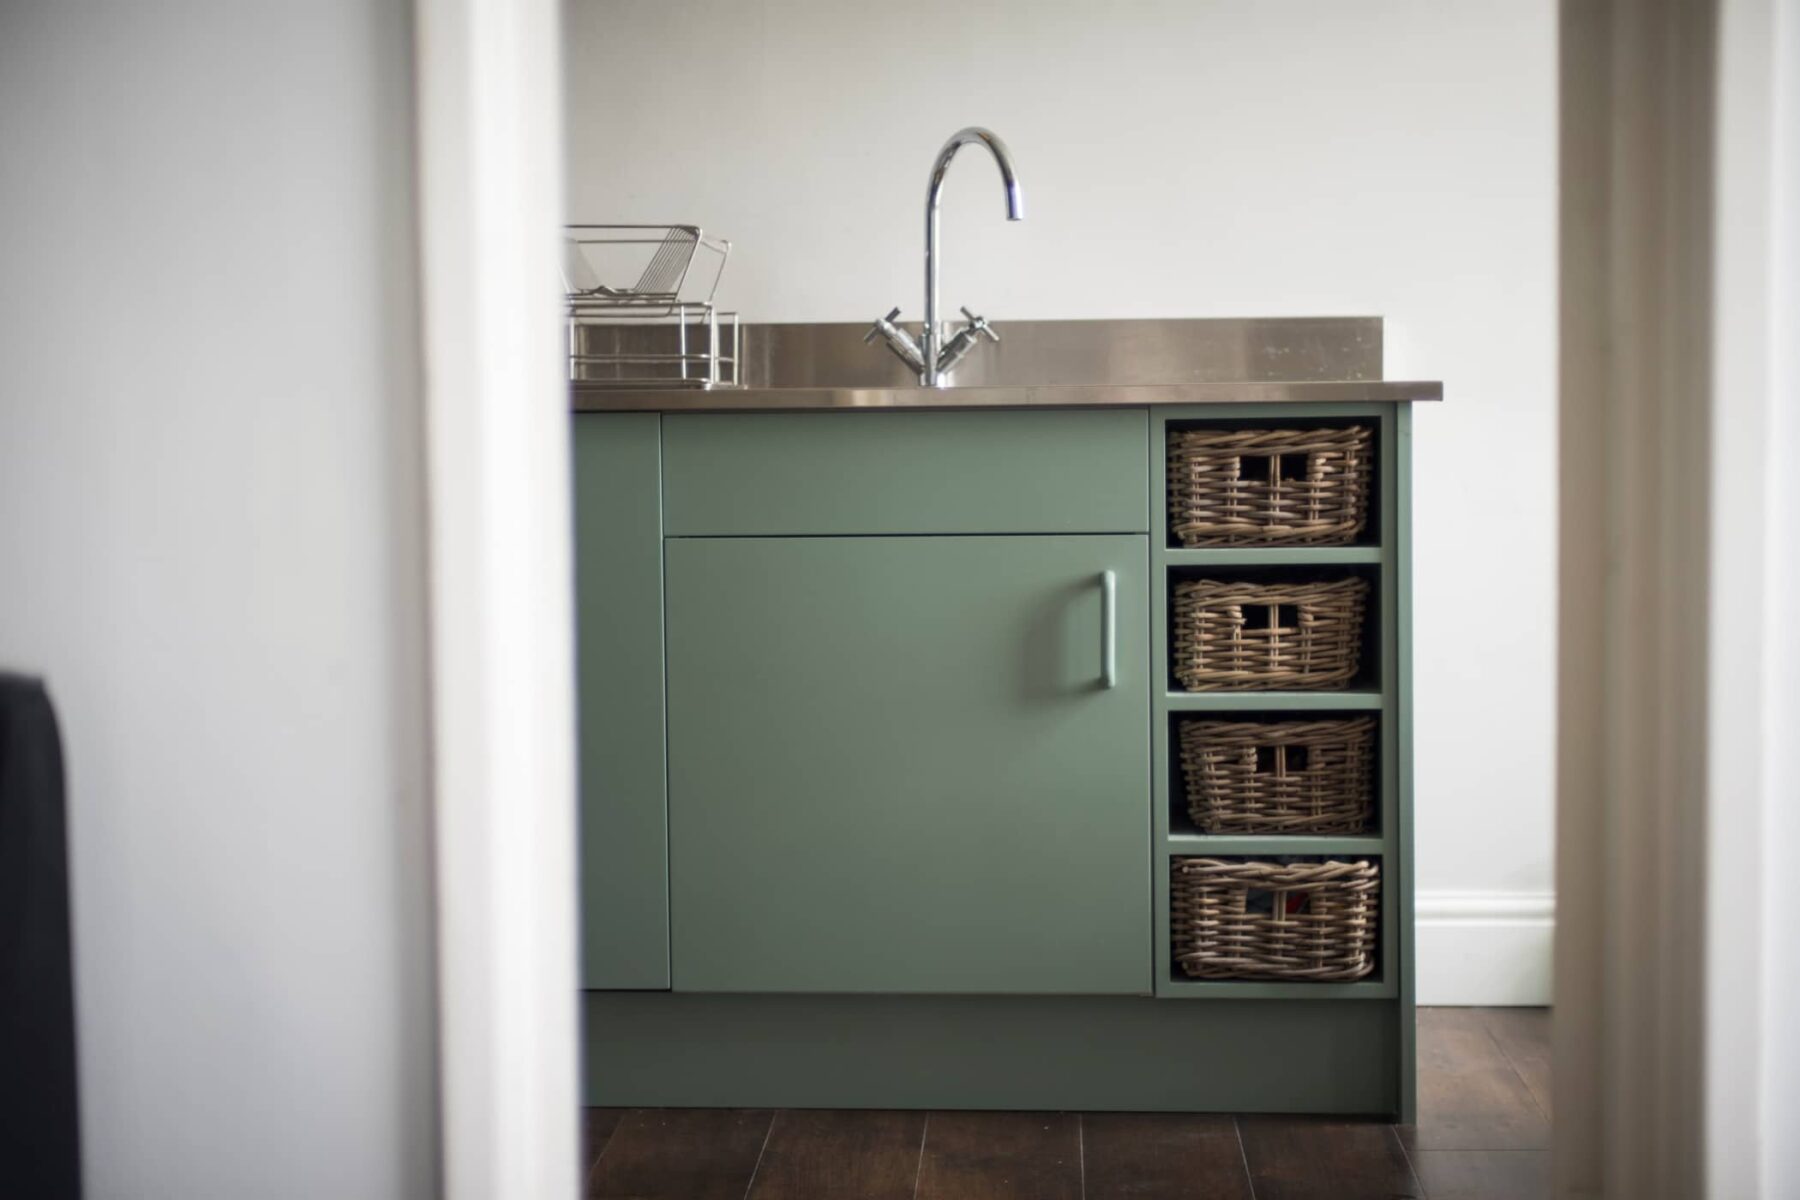 Storage detail from a bespoke contemporary kitchen by Bath Bespoke